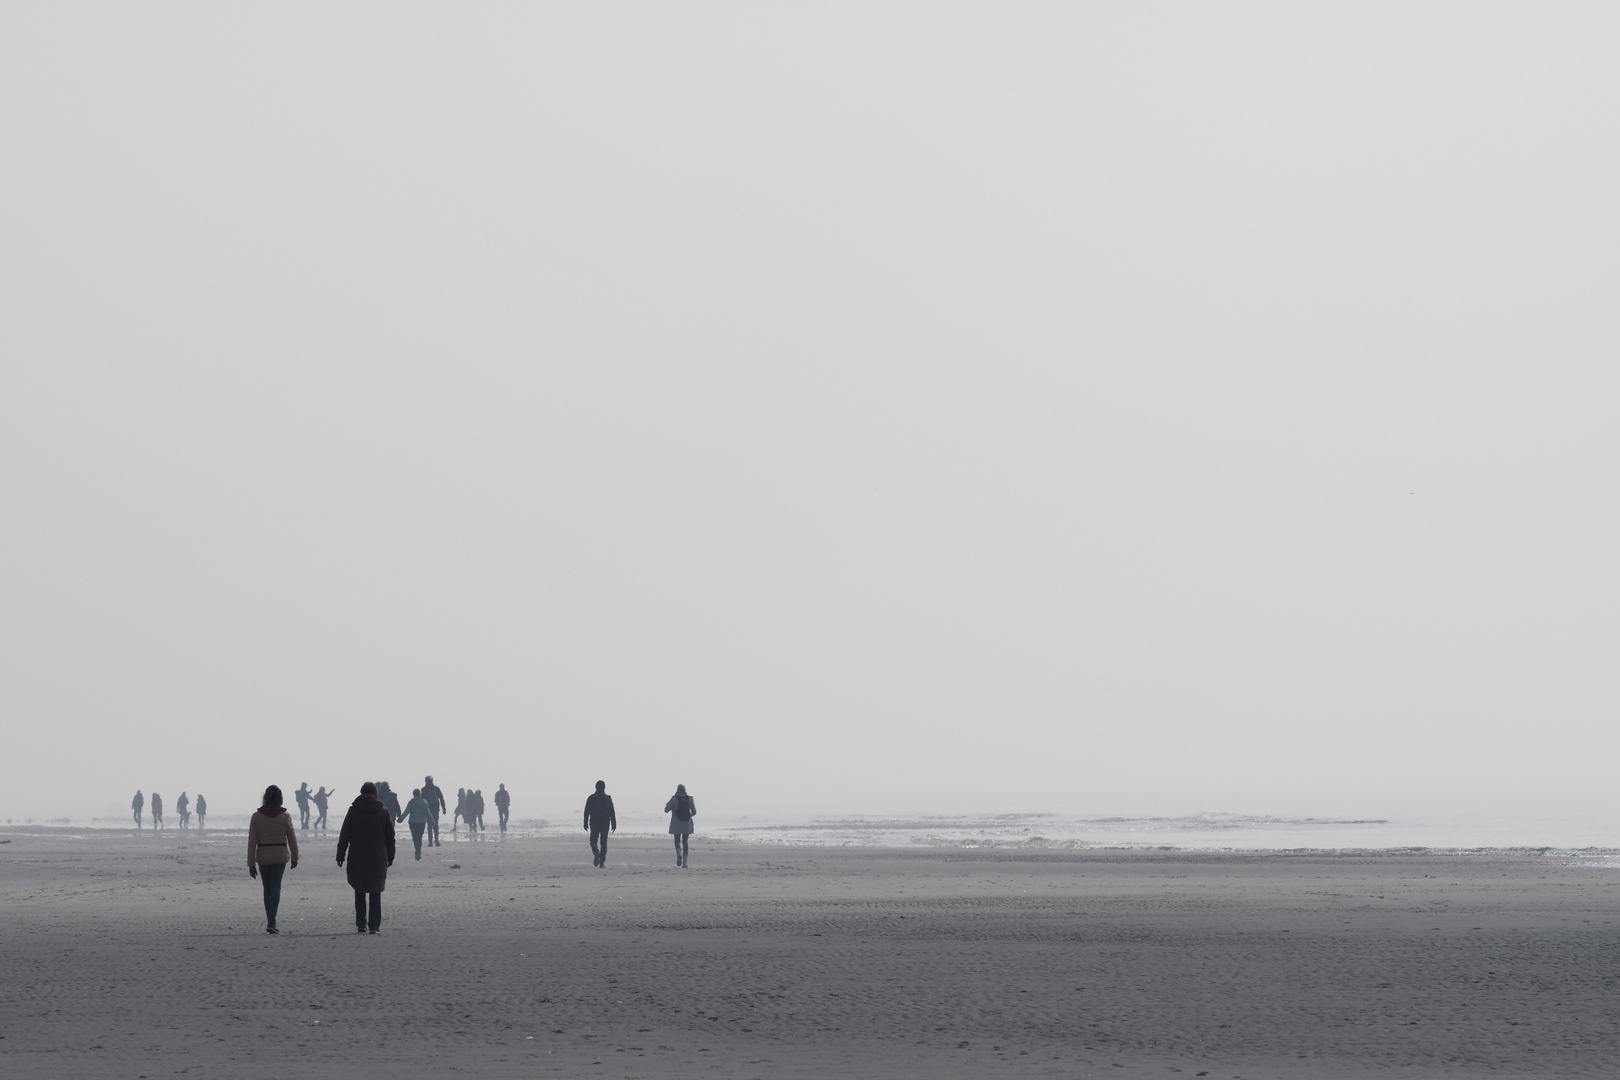 Spaziergang am Strand bei St. Peter-Ording